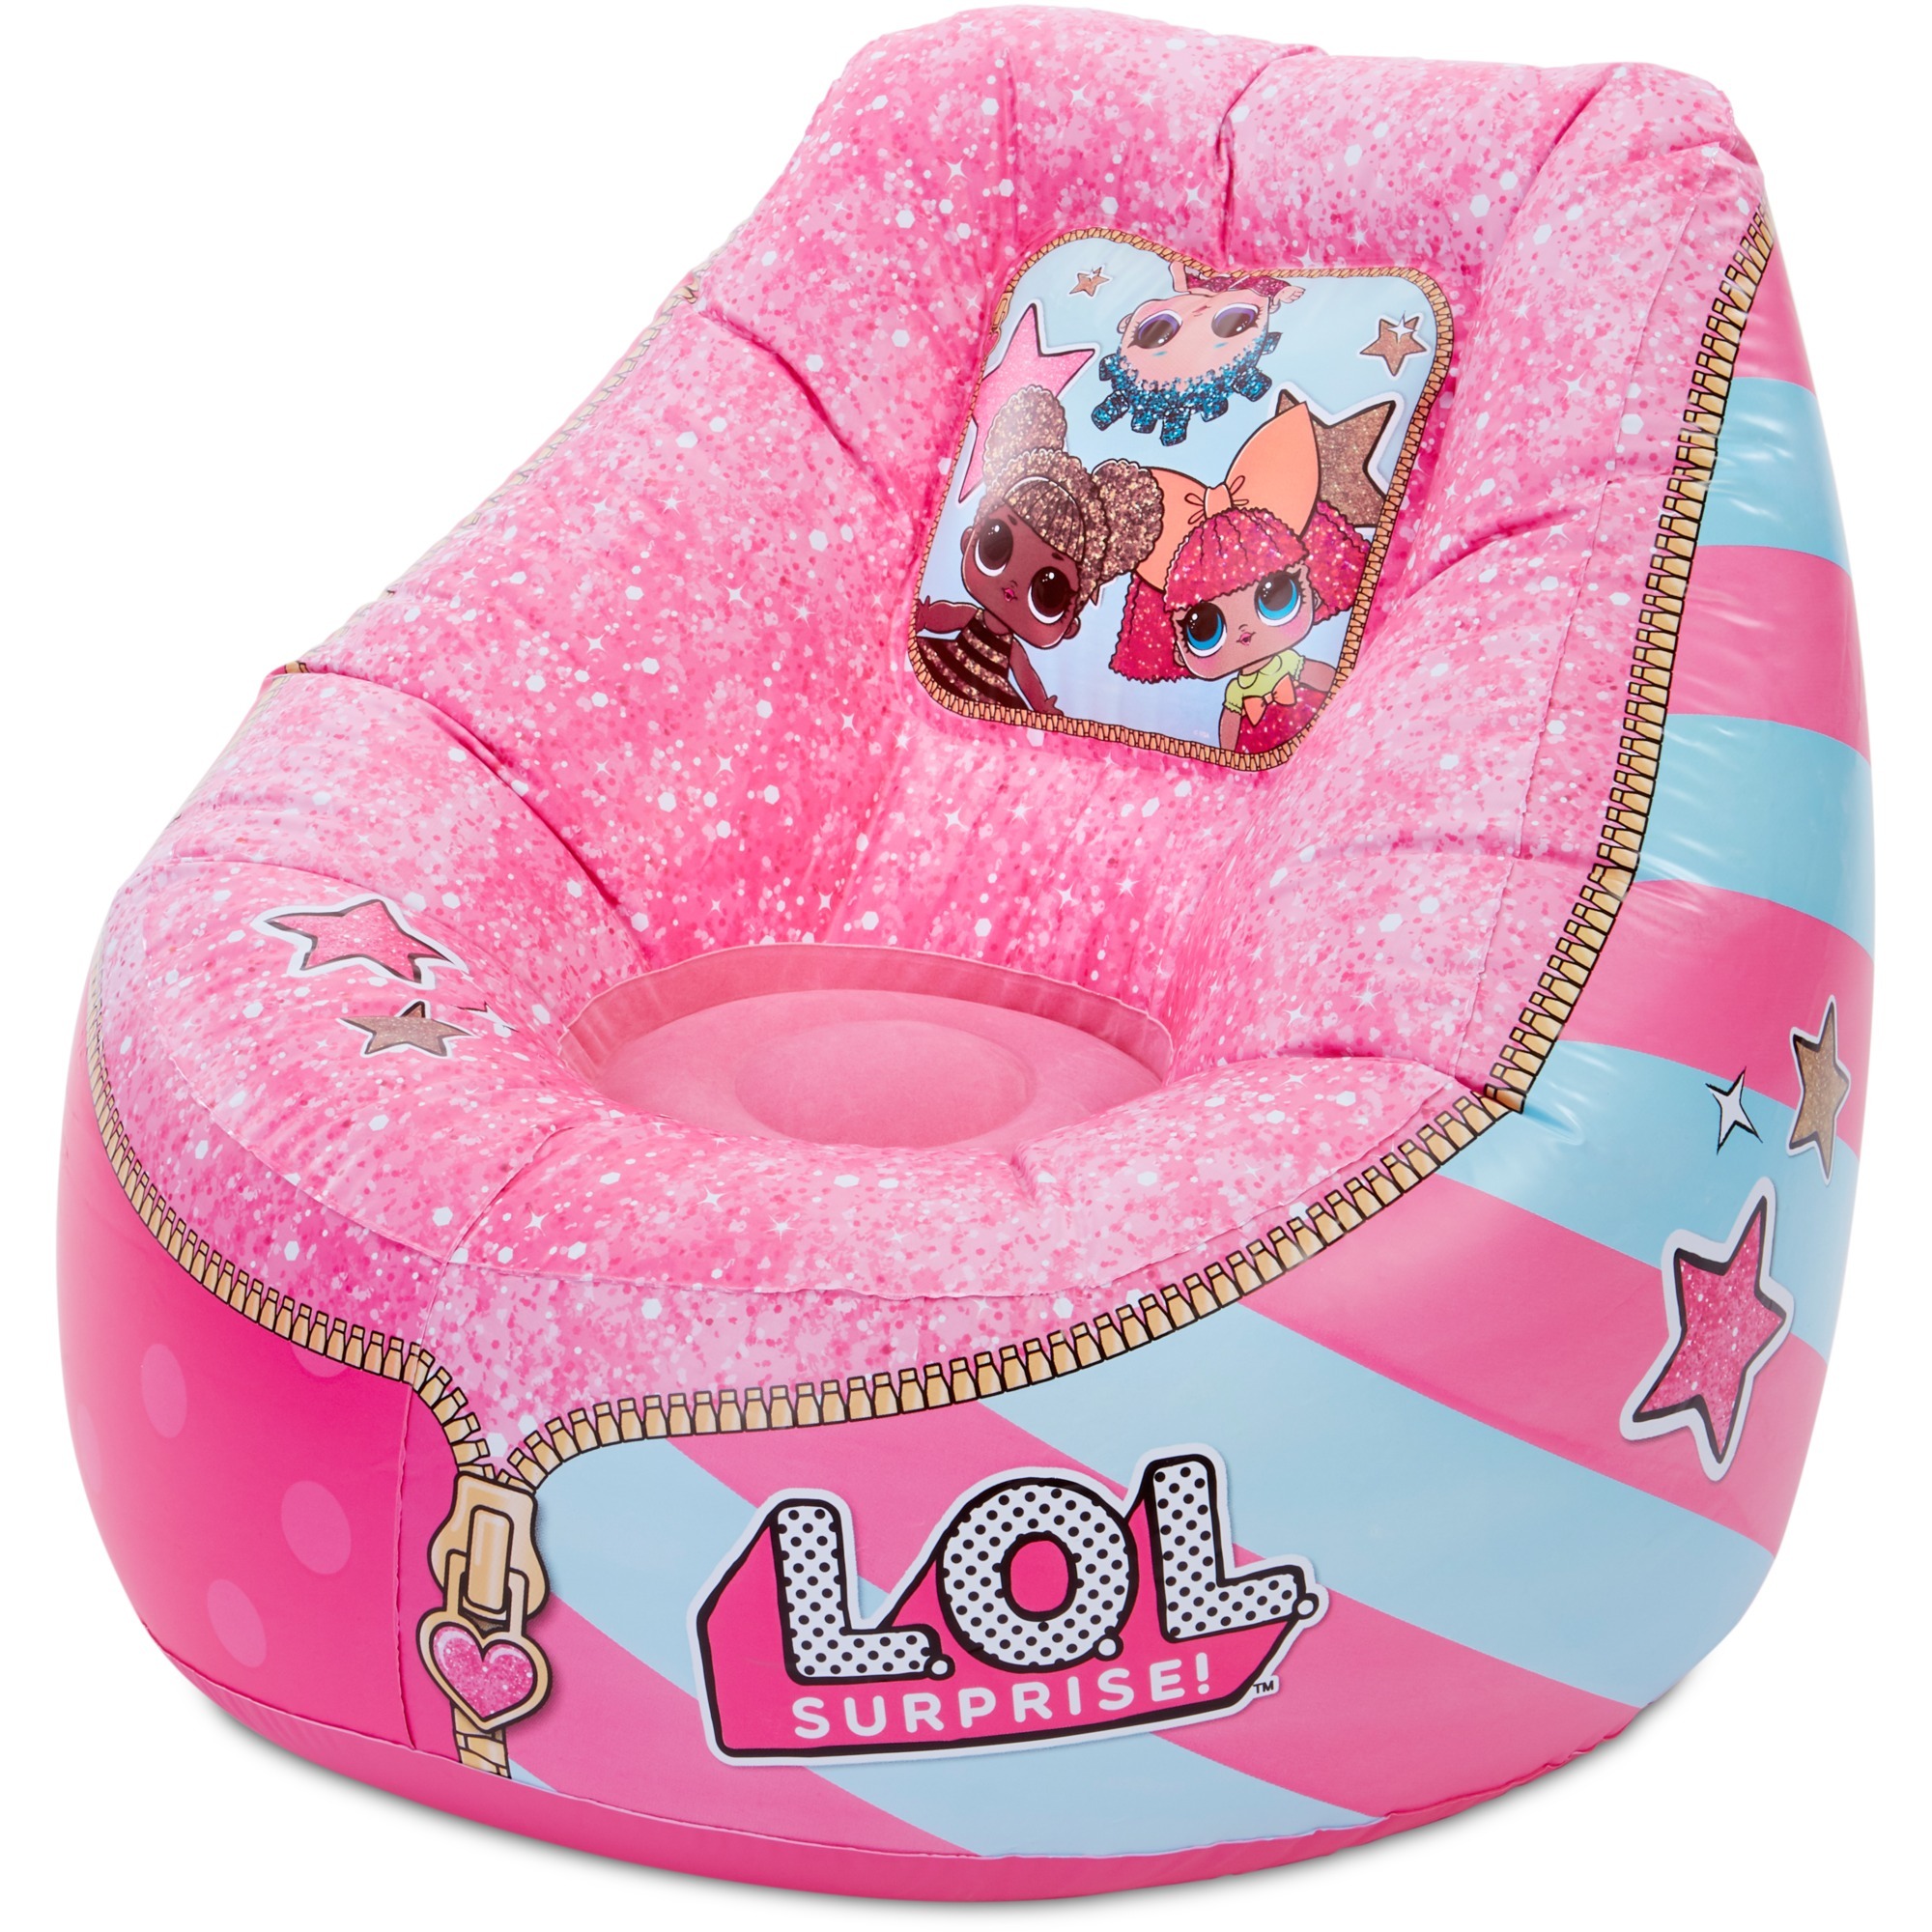 Image of Alternate - L.O.L. Surprise Inflatable Chair 651724E5C, Sessel online einkaufen bei Alternate